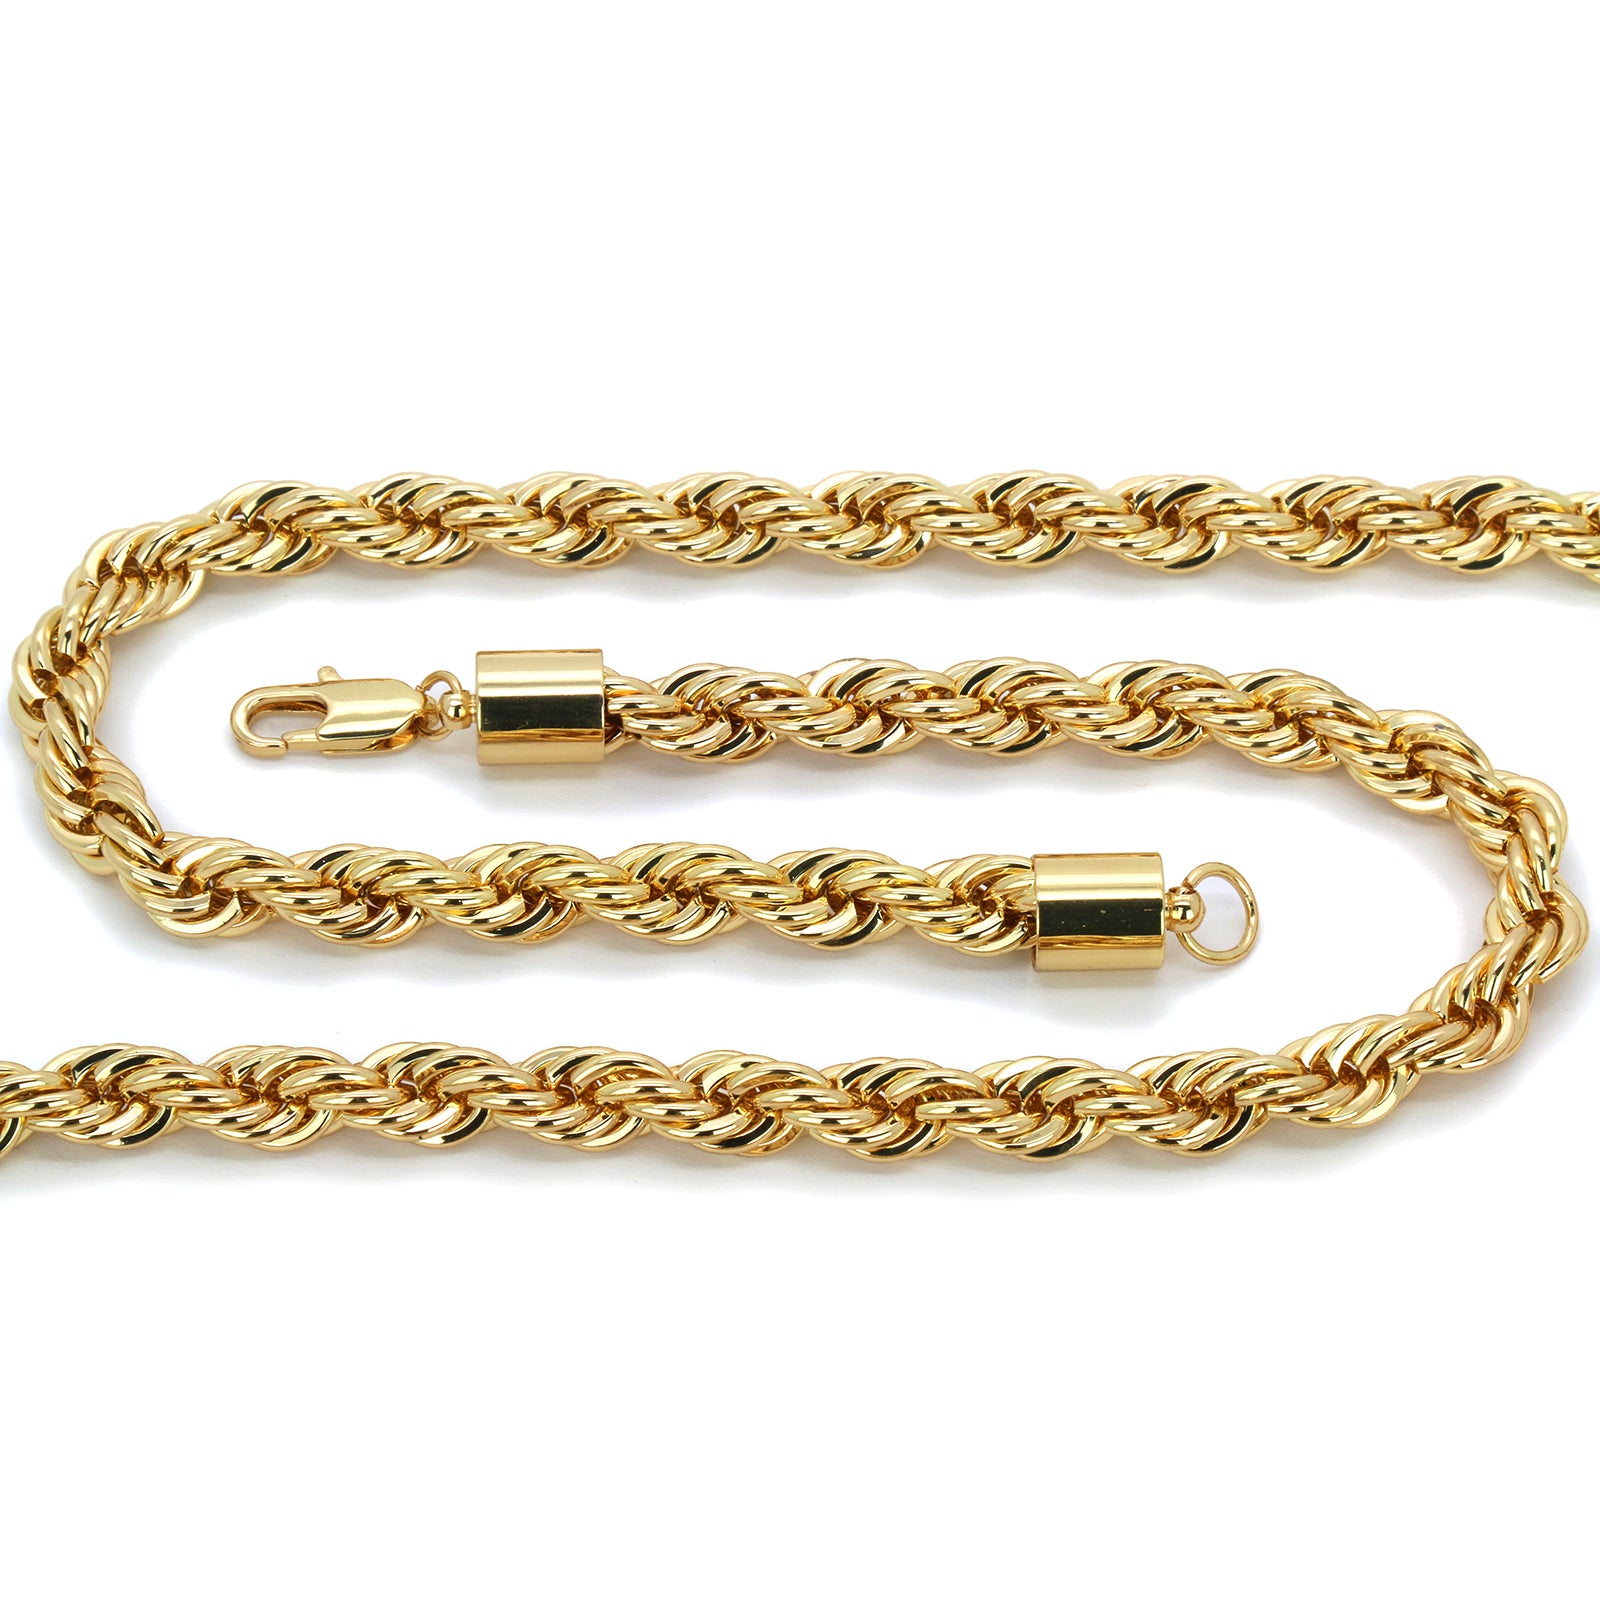 Gold Rope Chain 30"